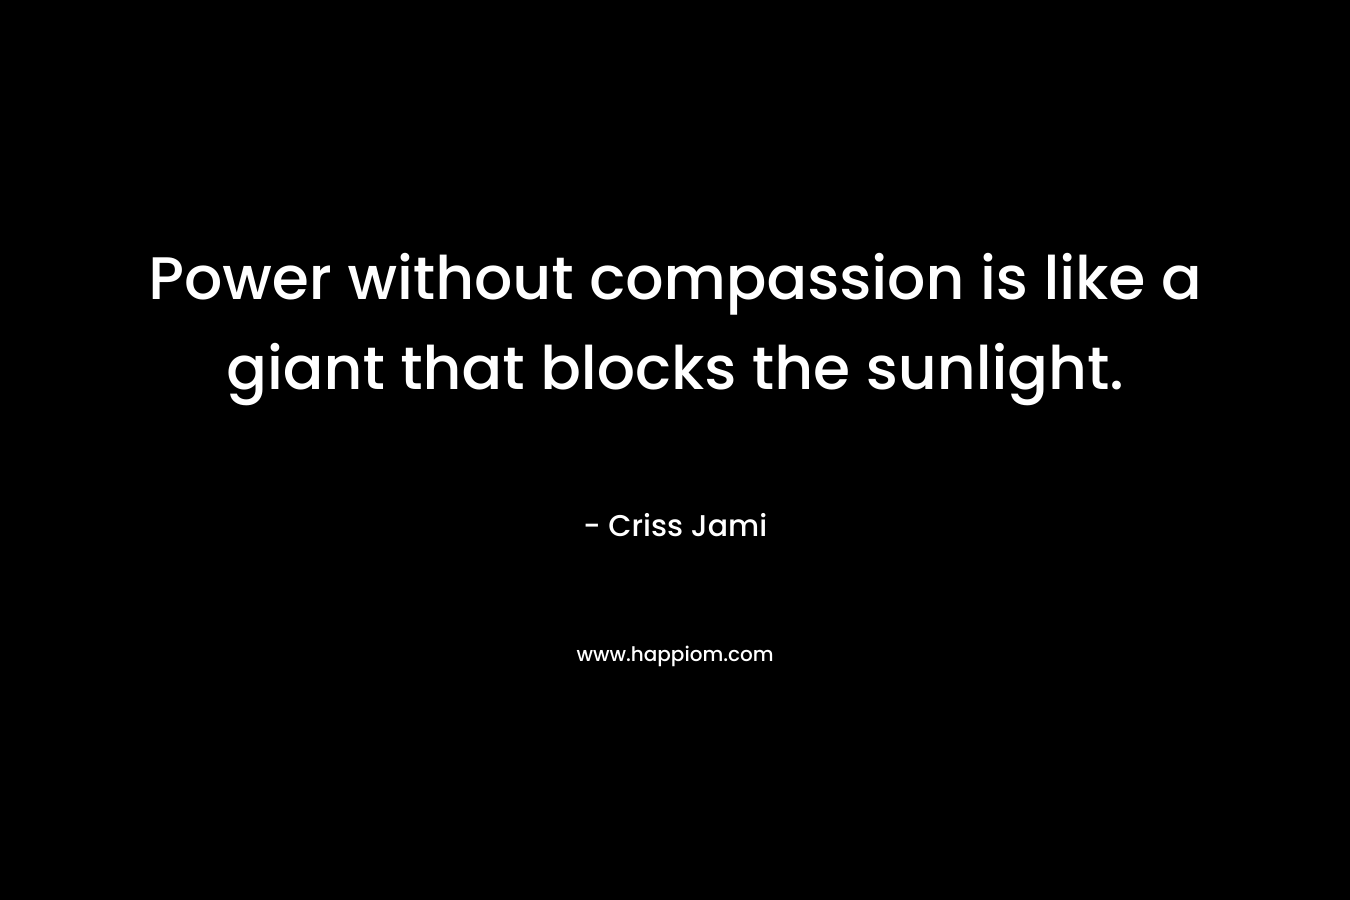 Power without compassion is like a giant that blocks the sunlight.